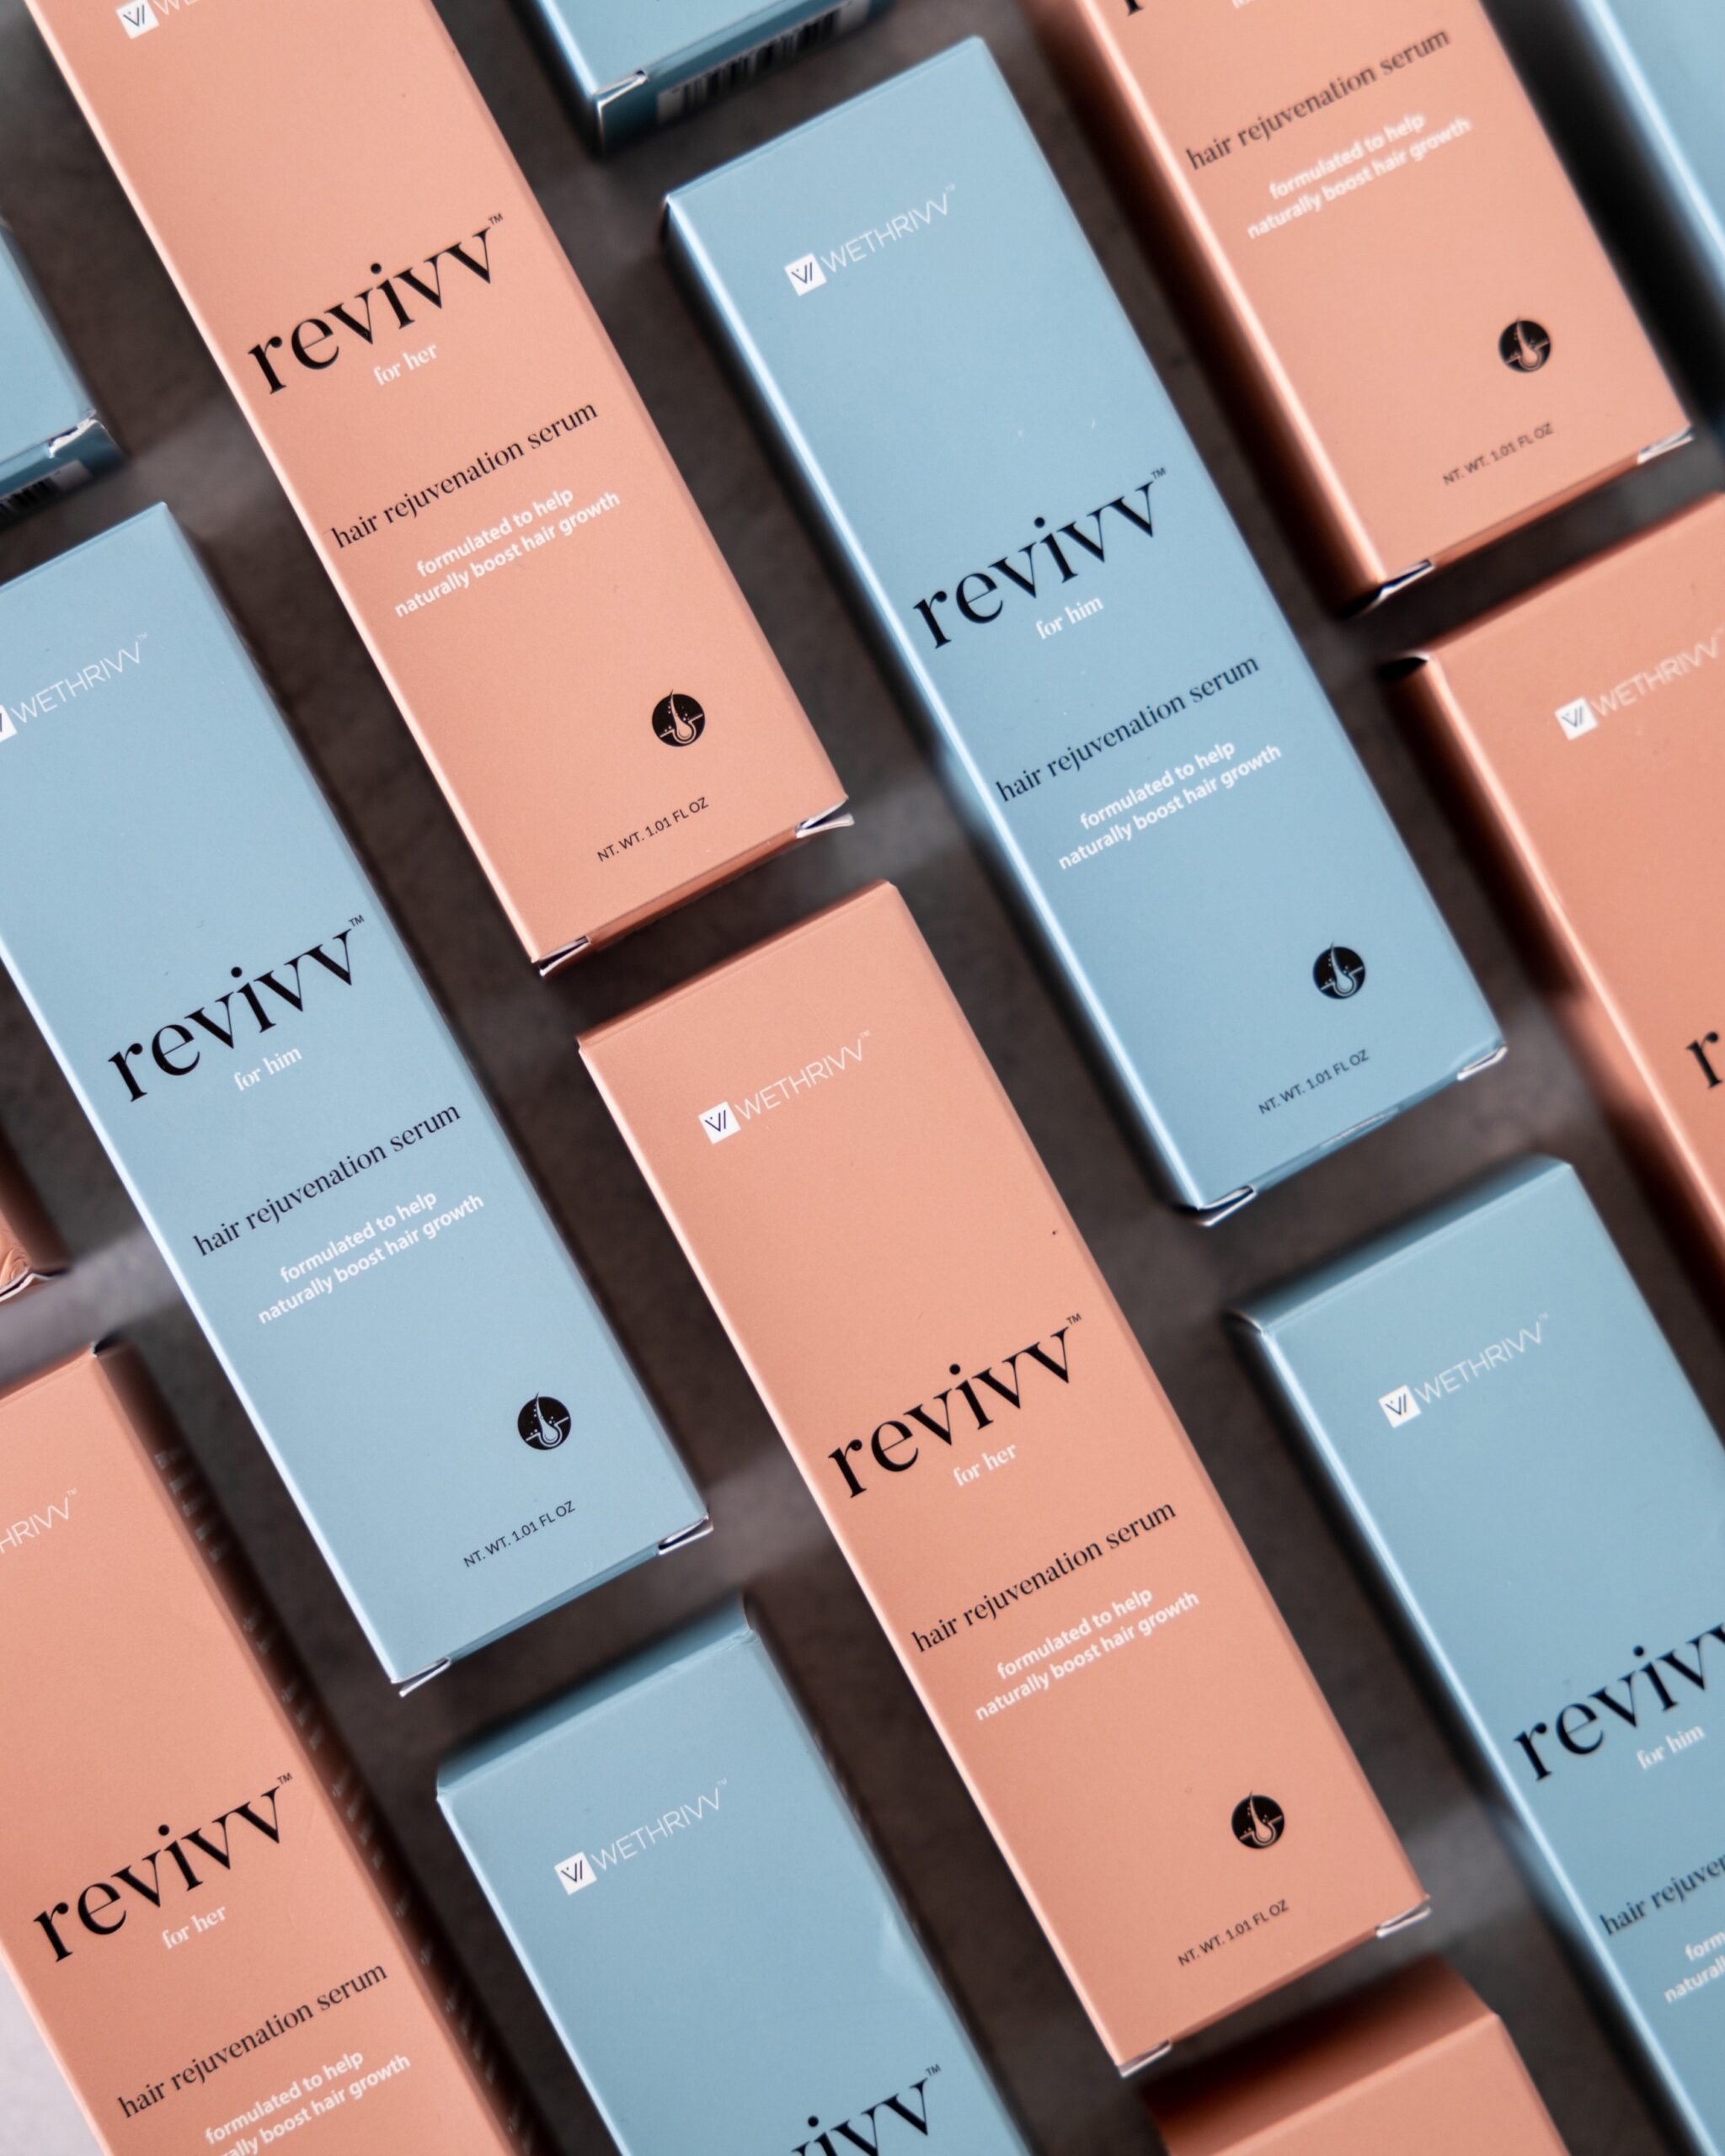 WETHRIVV™ – A Beauty and Wellness Brand Launches REVIVV™ Hair Growth Serum for Men & Women